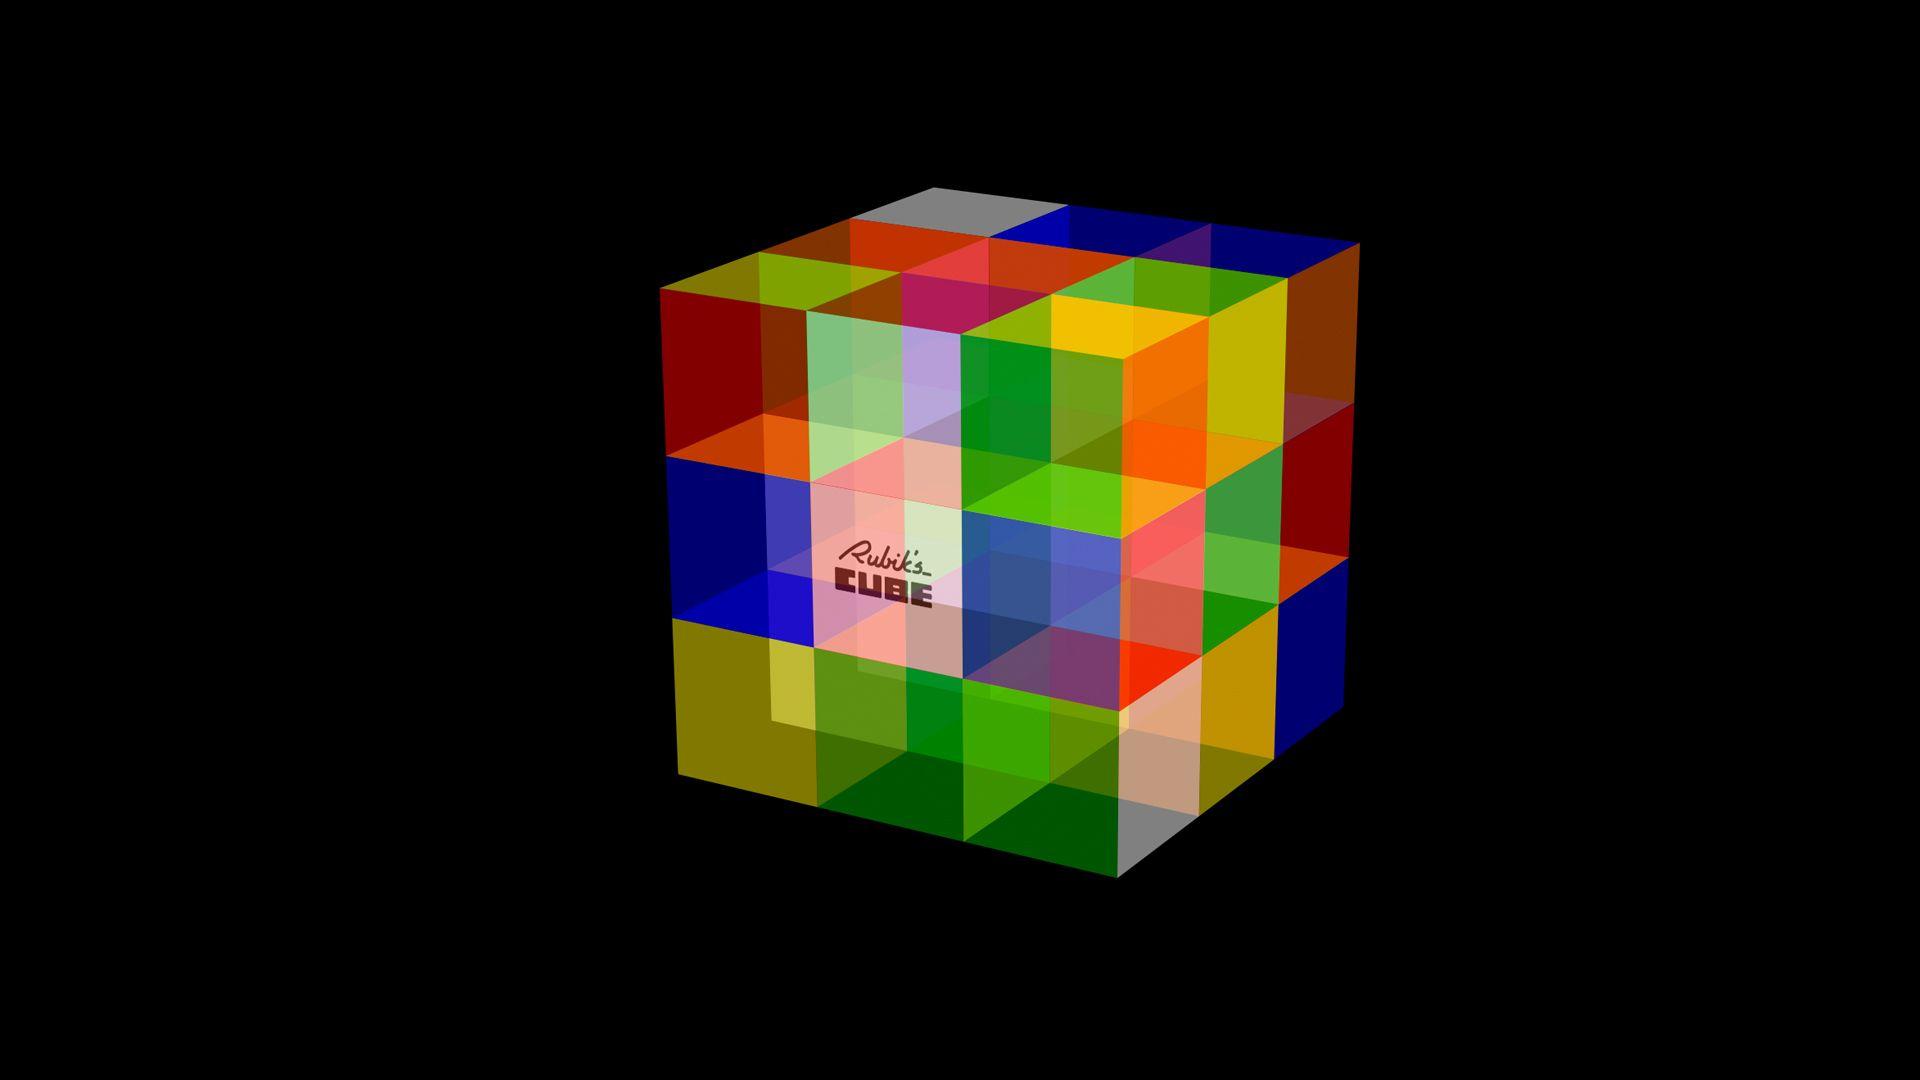 Rubiks Cube  Animated  Interactive Wallpaper  YouTube